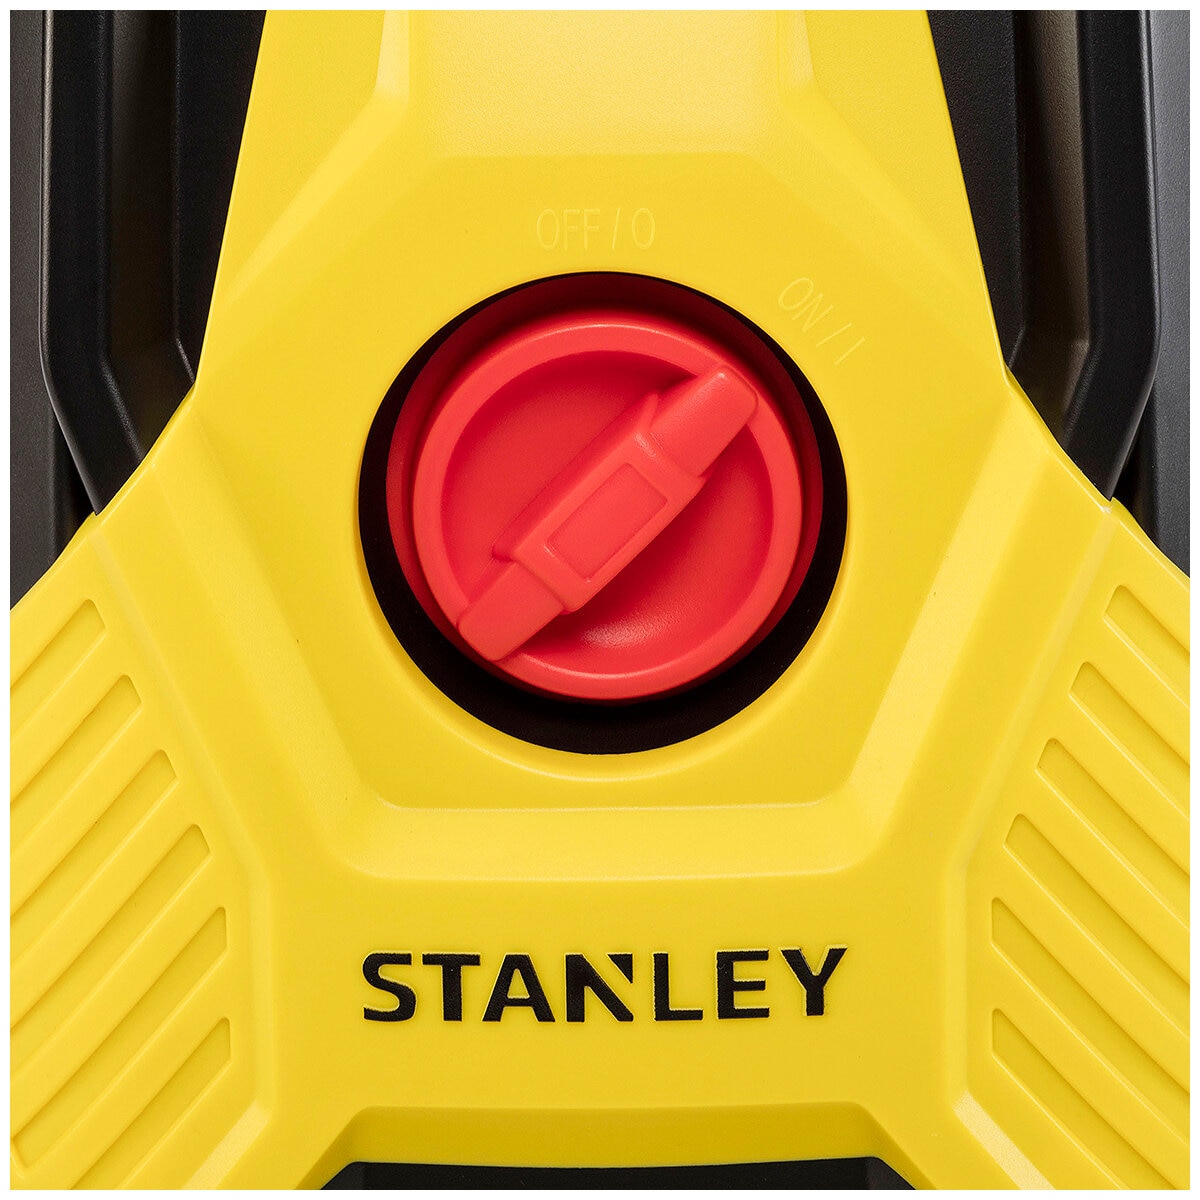 Stanley 1600W 1740PSI Electric Pressure Washer